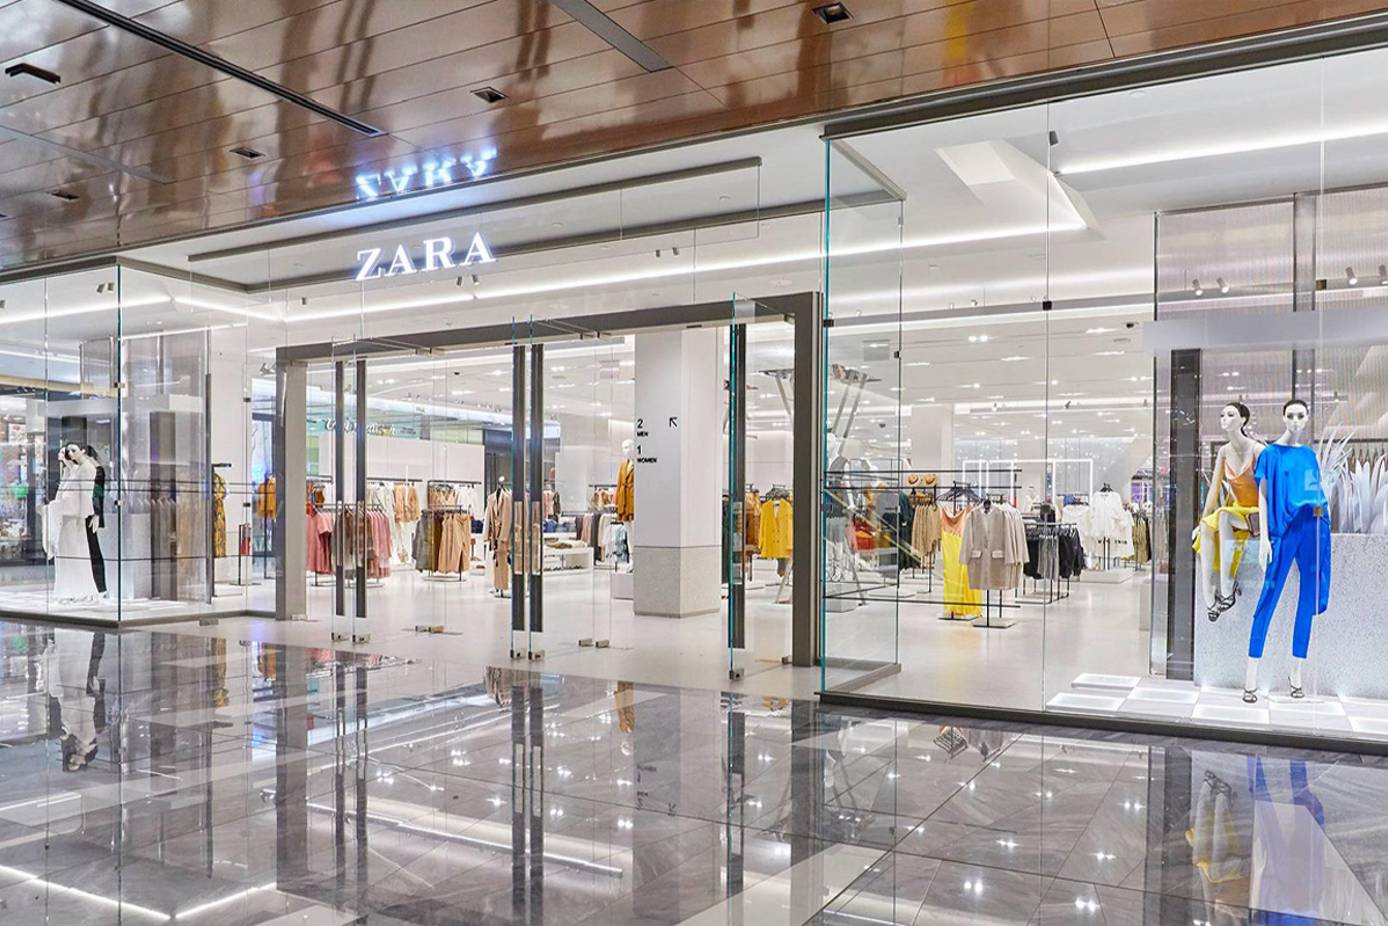 Zara Is Charging An 'Automatic' Fee For Their Paper Bags And